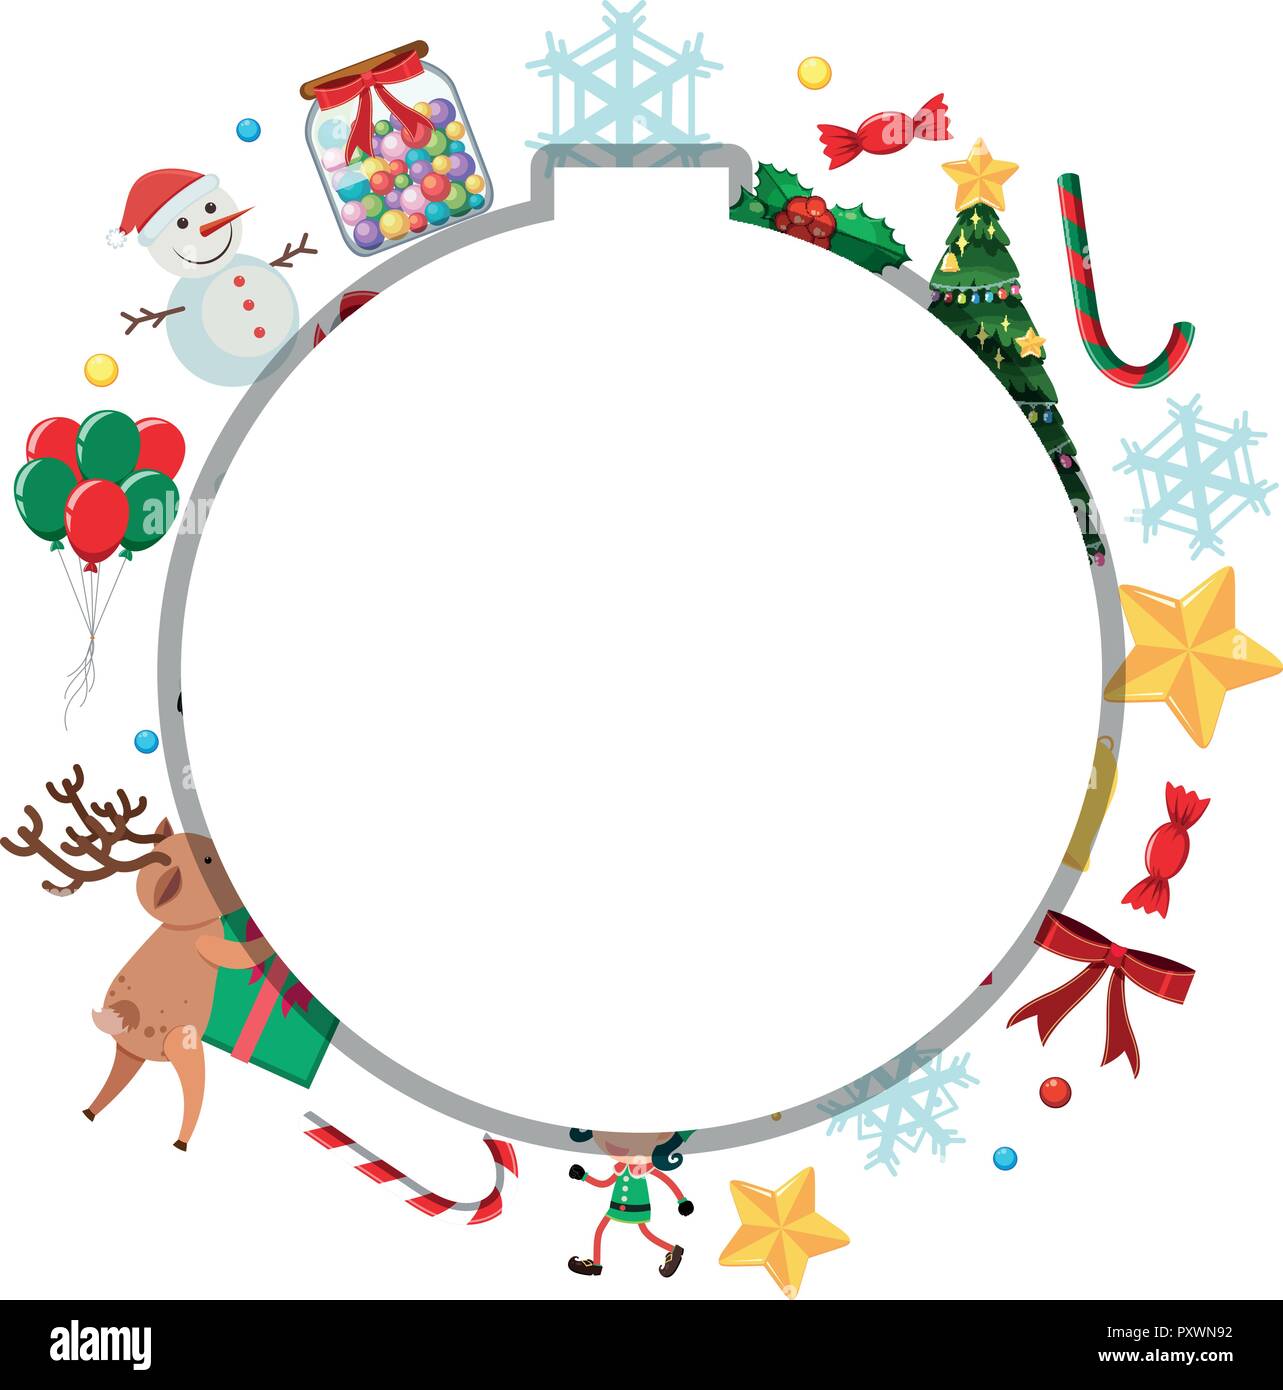 Border template with snowman and reindeer illustration Stock Vector ...